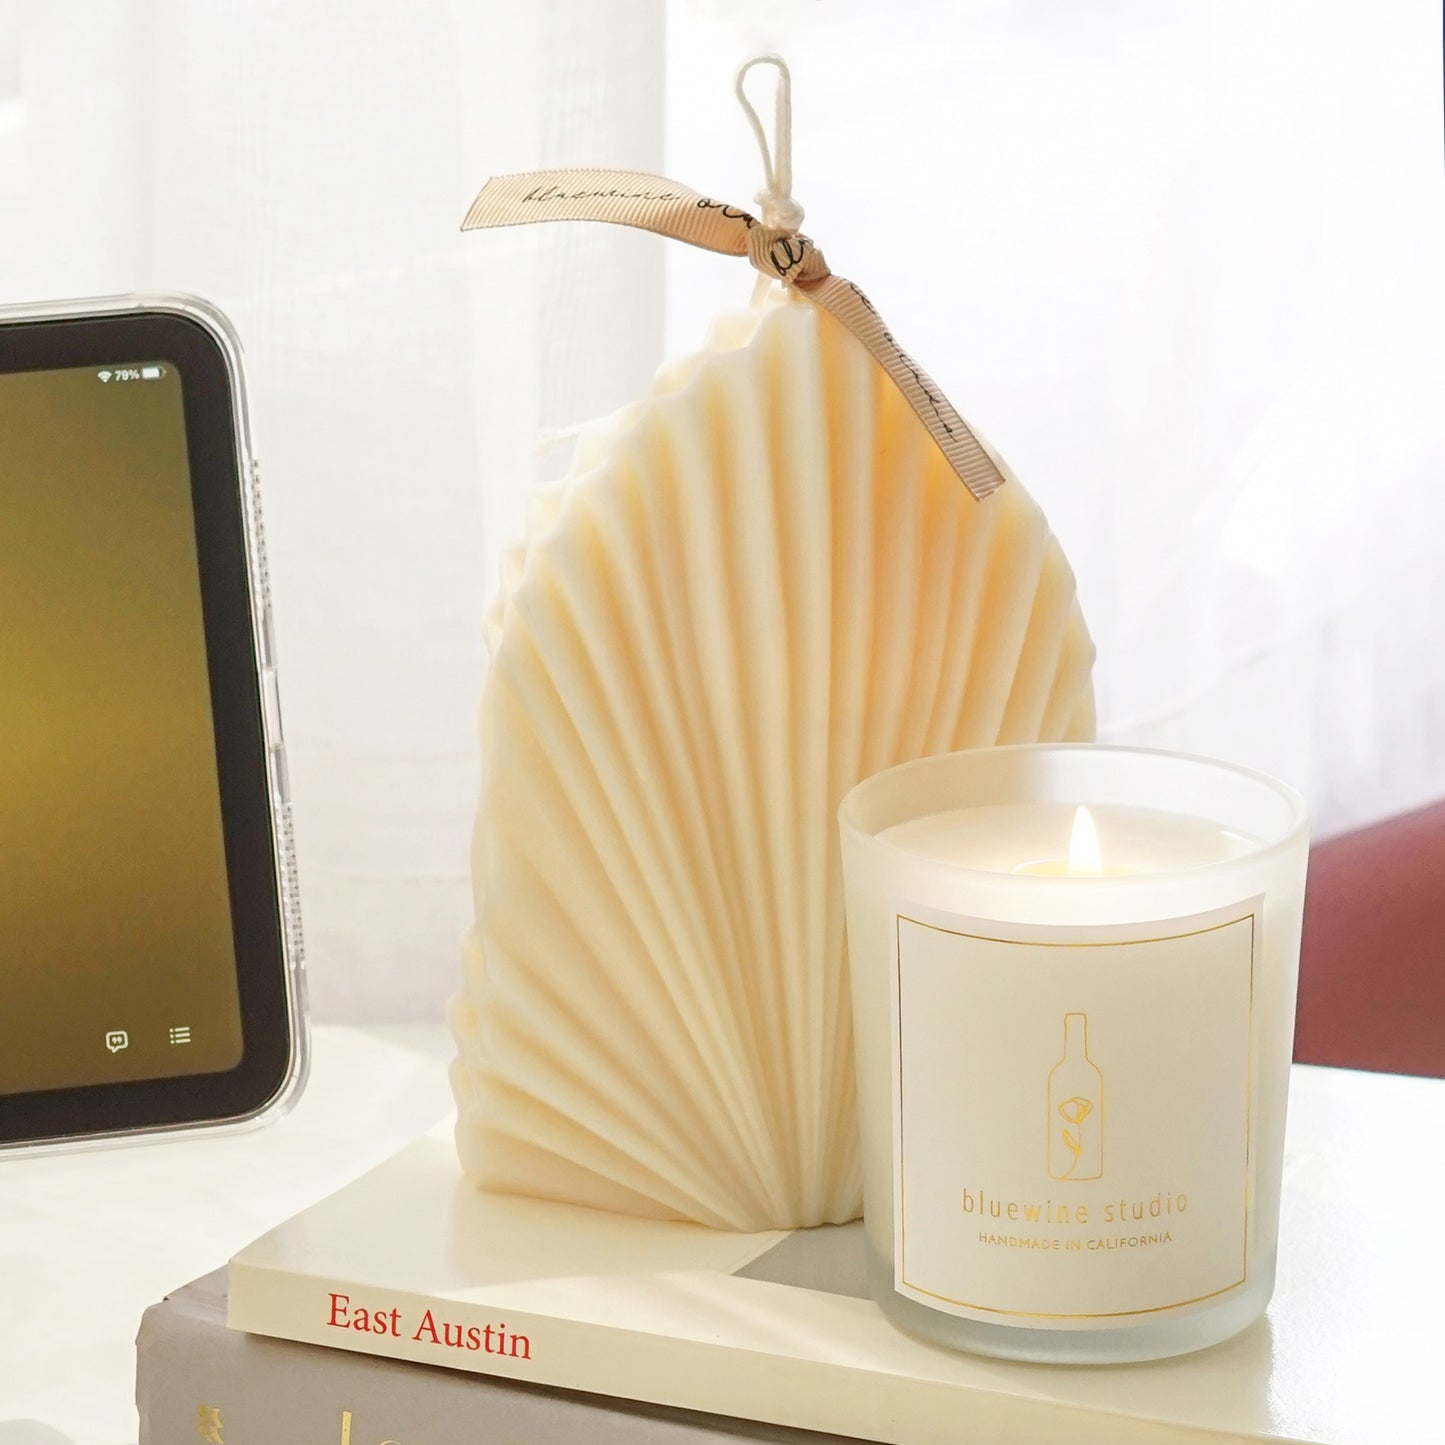 a leaf shape sculptural white natural soy pillar candle and a lit 5oz frosted glass container candle on book stacks and ipad mini playing music messages from her by sabrina claudio